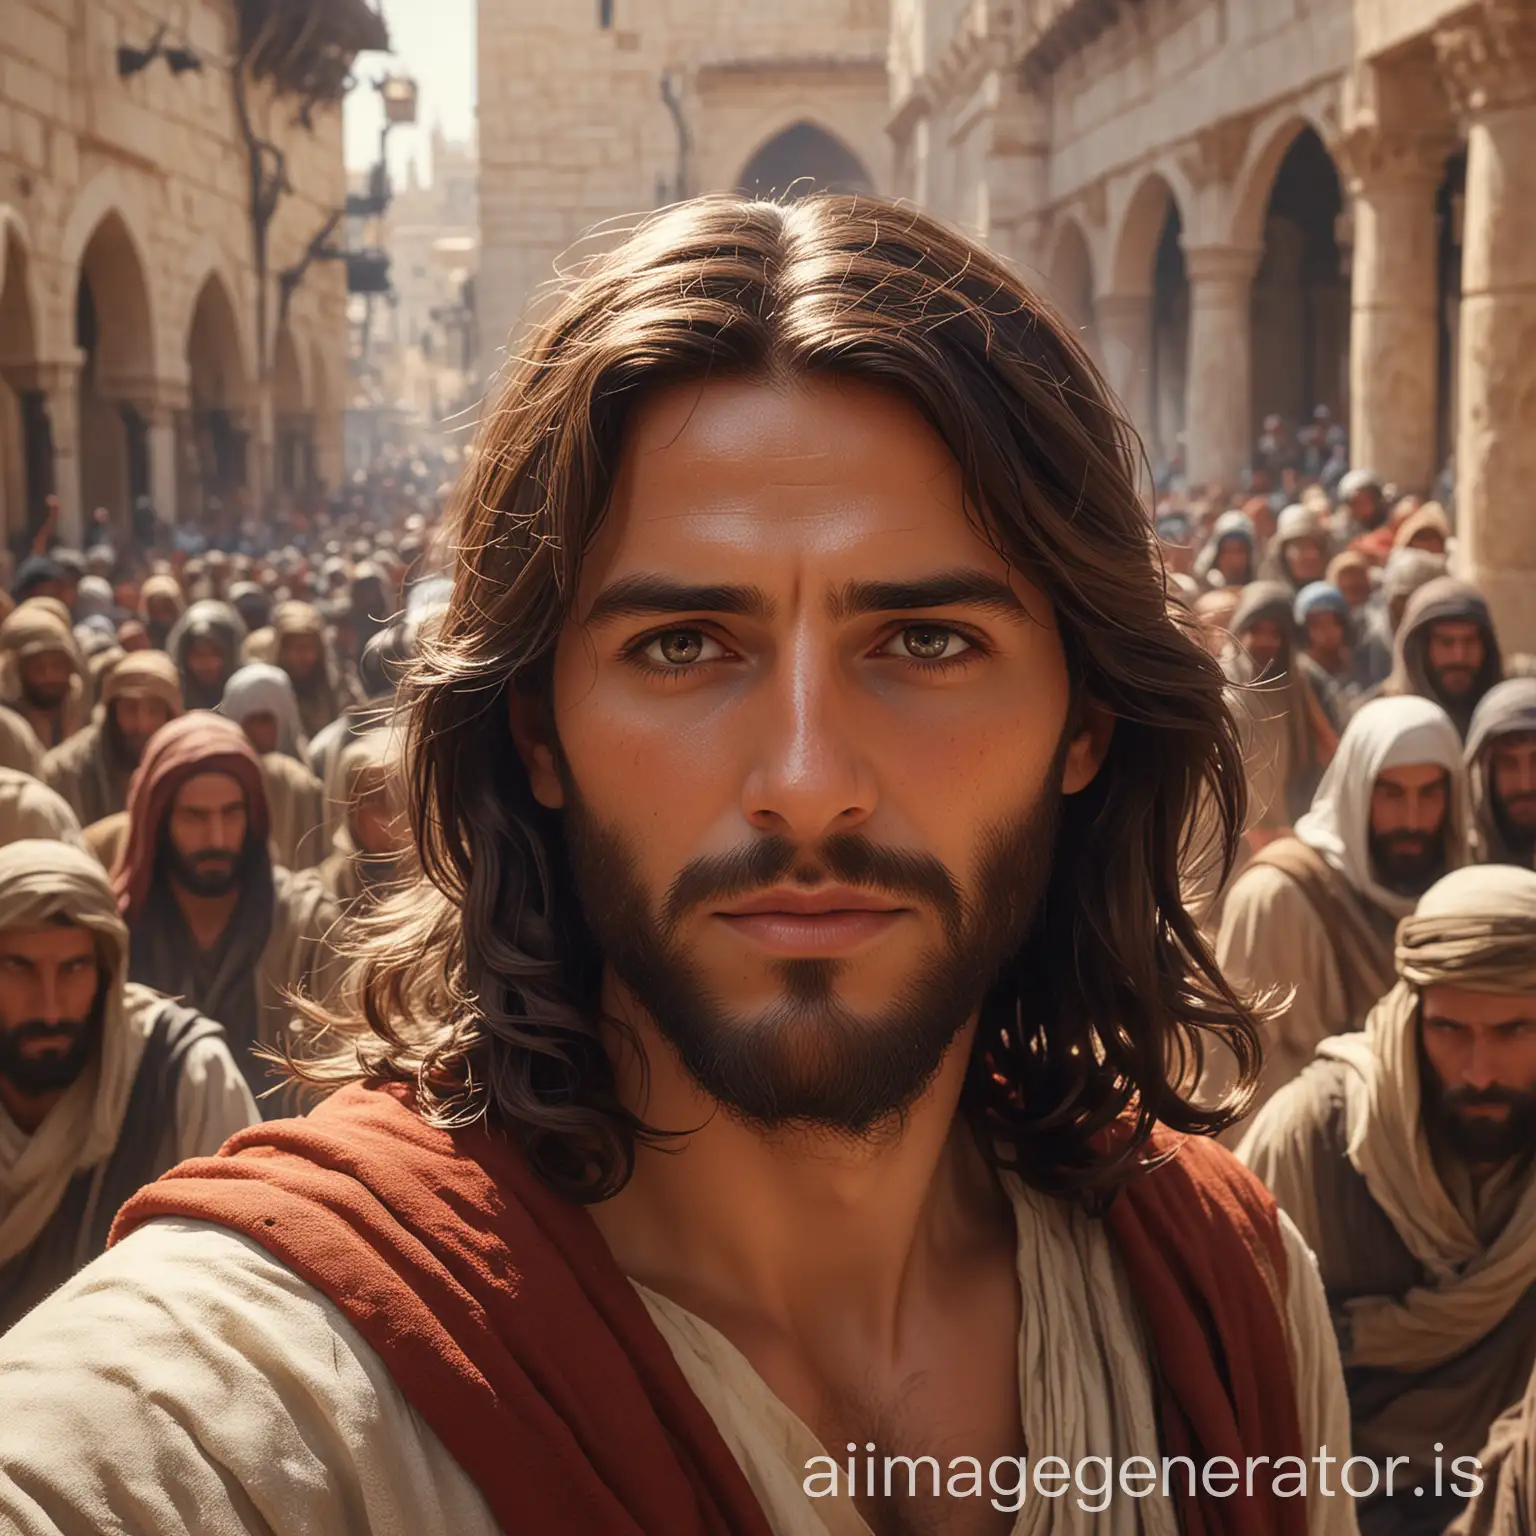 close up image of a male Jesus on the temple mount surrounded by people, Shutterstock, epic fantasy card game art, James Gurney and Andreas Rocha, highly detailed high resolution, high quality photography